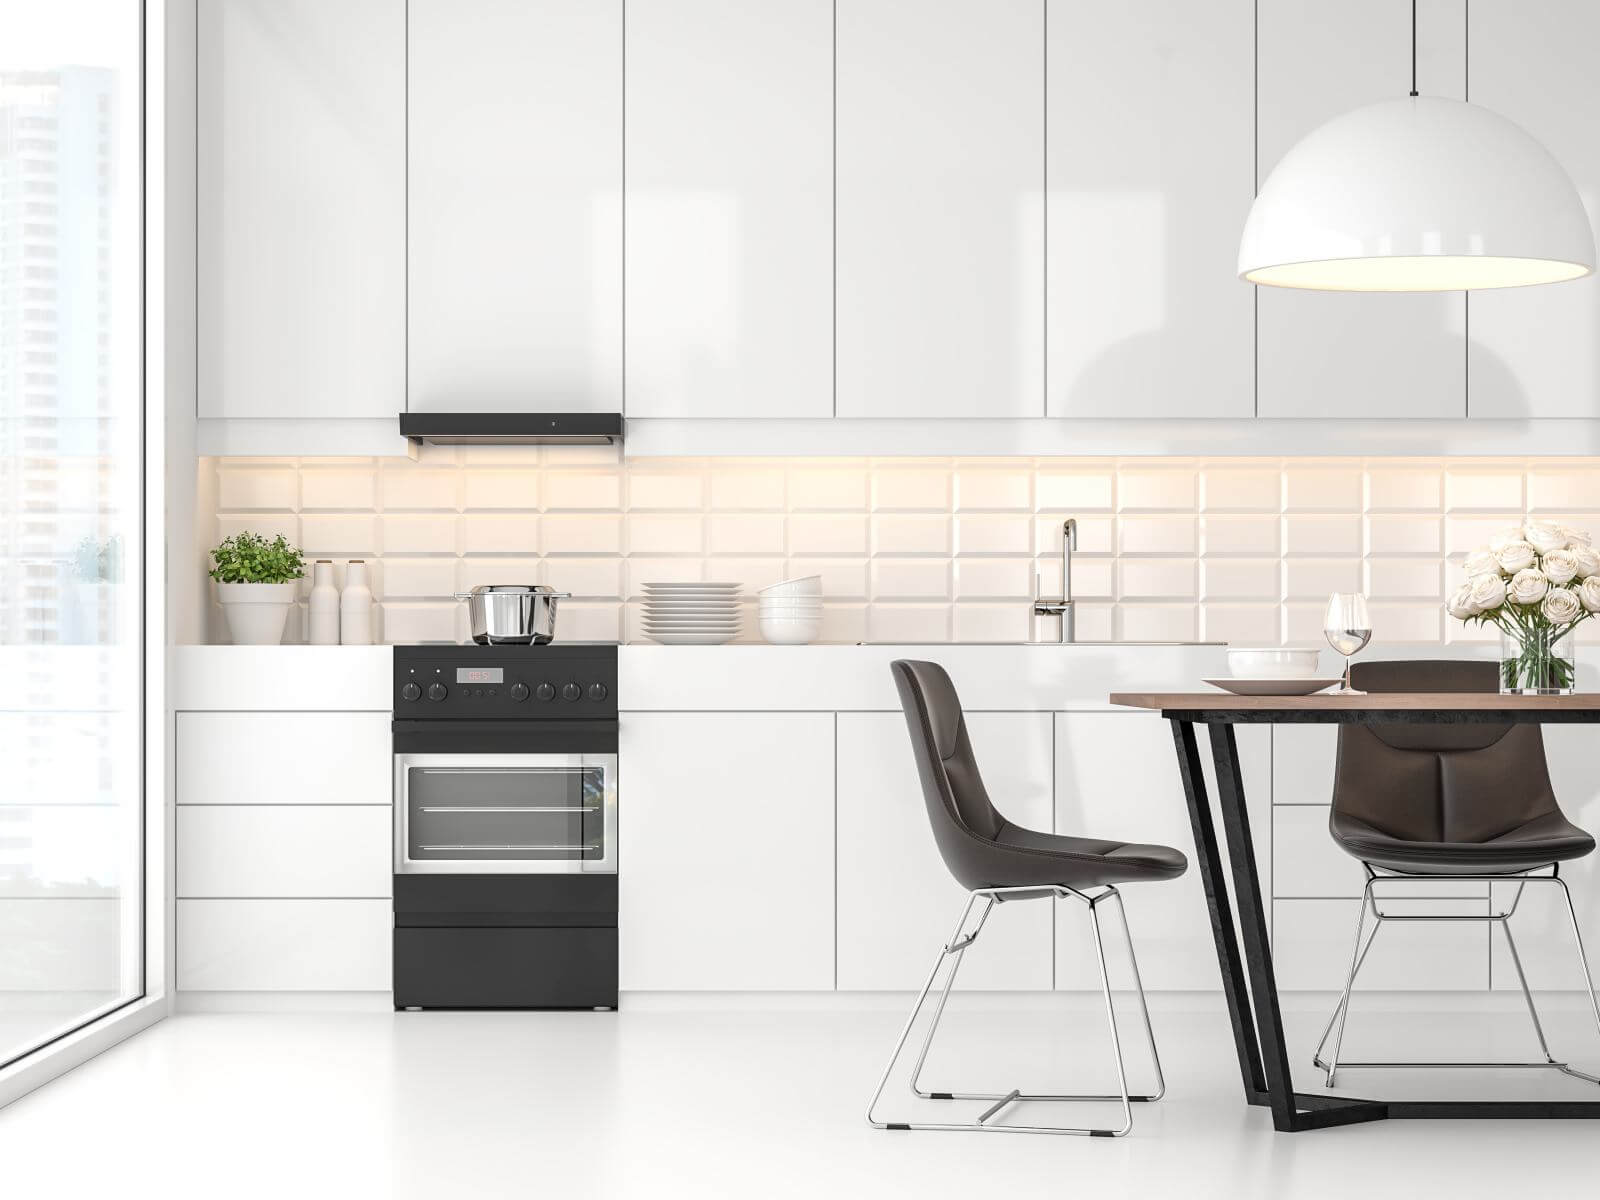 Modern white  kitchen and dining room 3d render.There are white floor and wall, Glossy white cabinet doors,Dark brown leather chair,The room has large windows. lookink out to the city view.